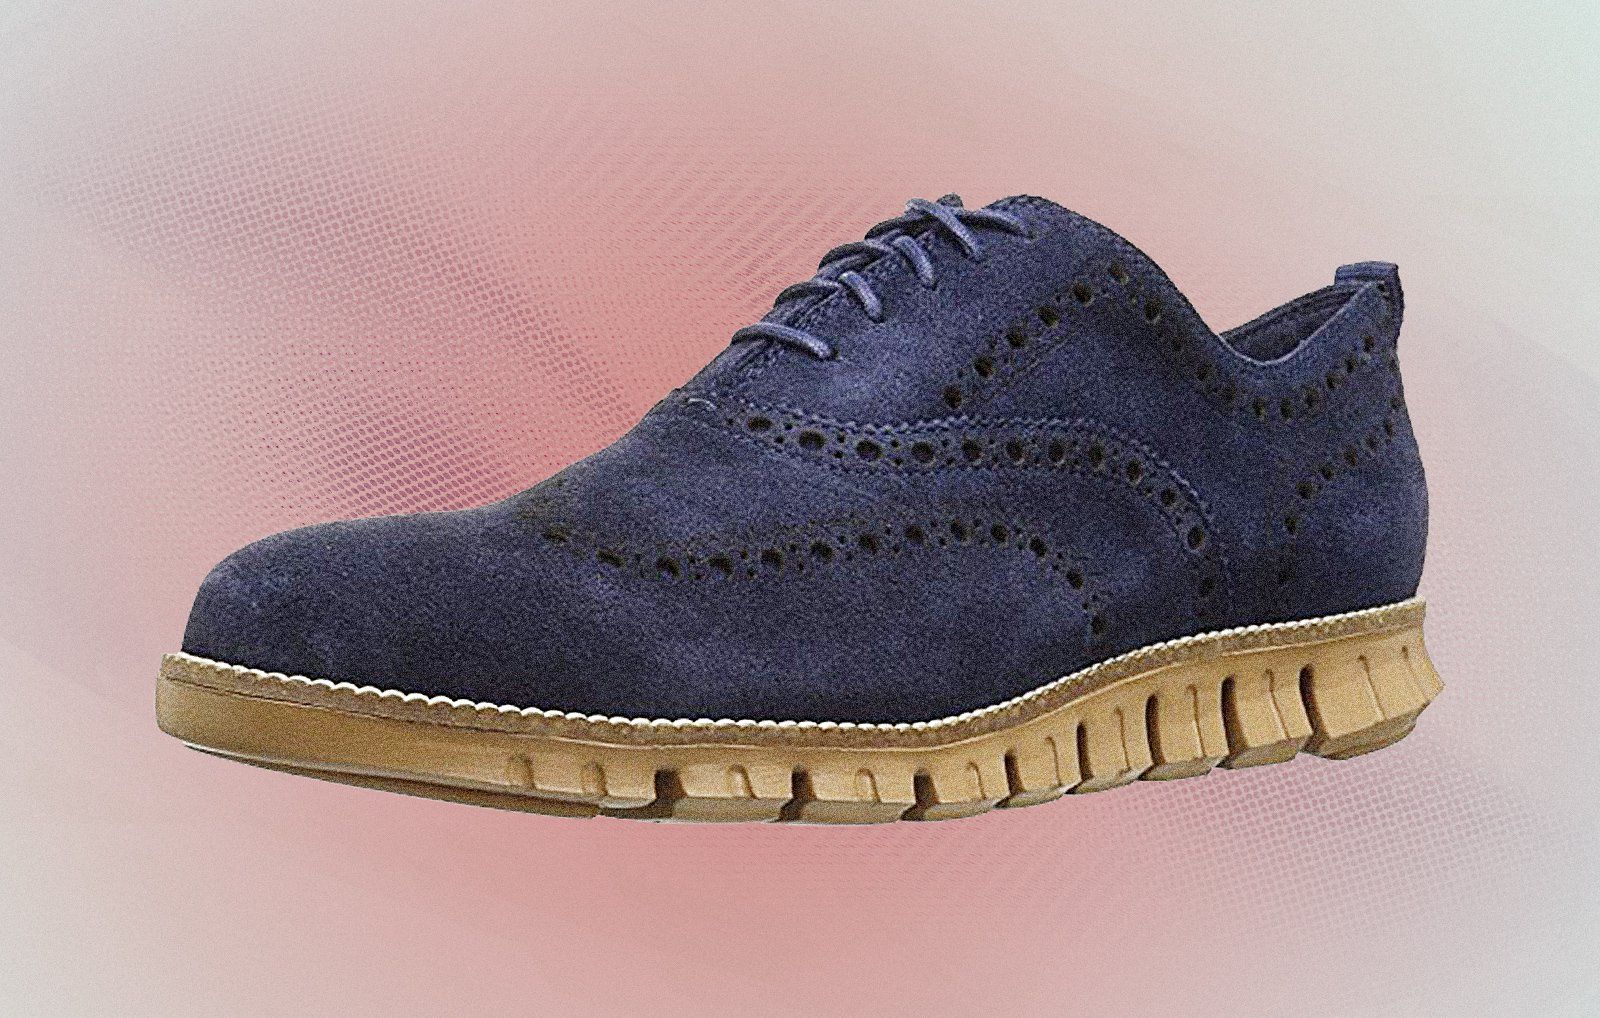 Who Makes Sililar Shoes to Cole Haan?